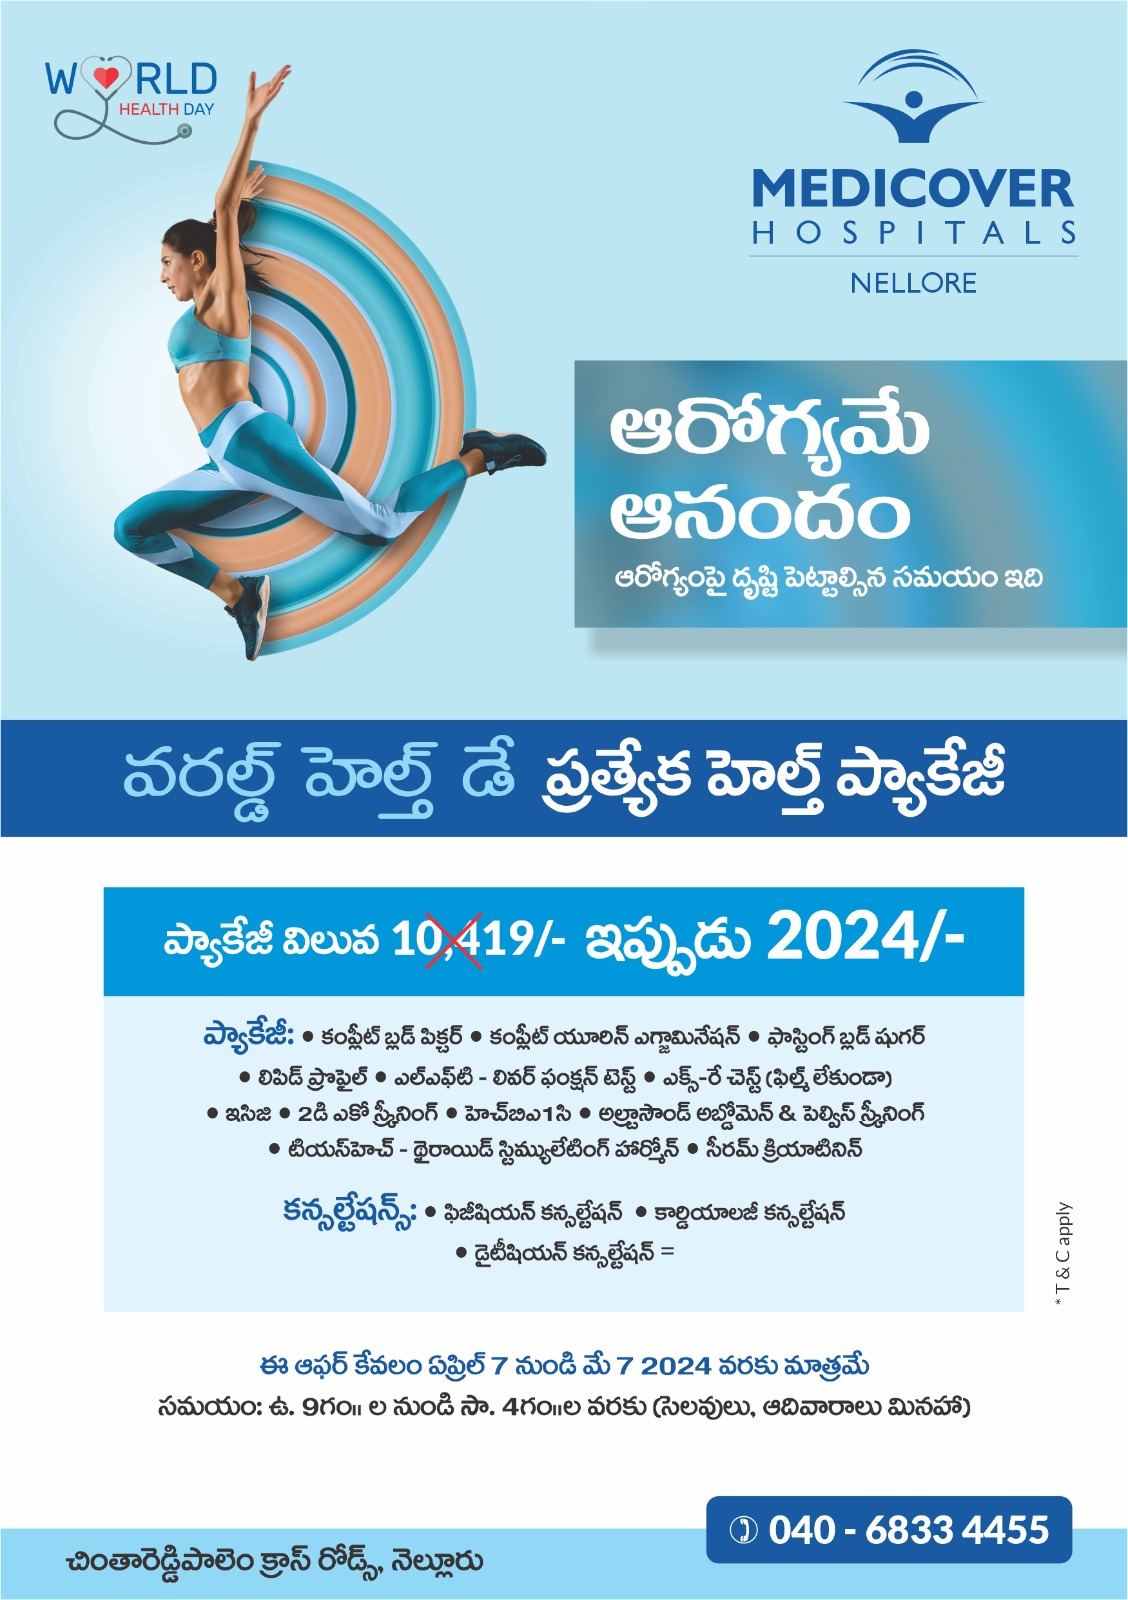 World Health Day Special Package - Nellore